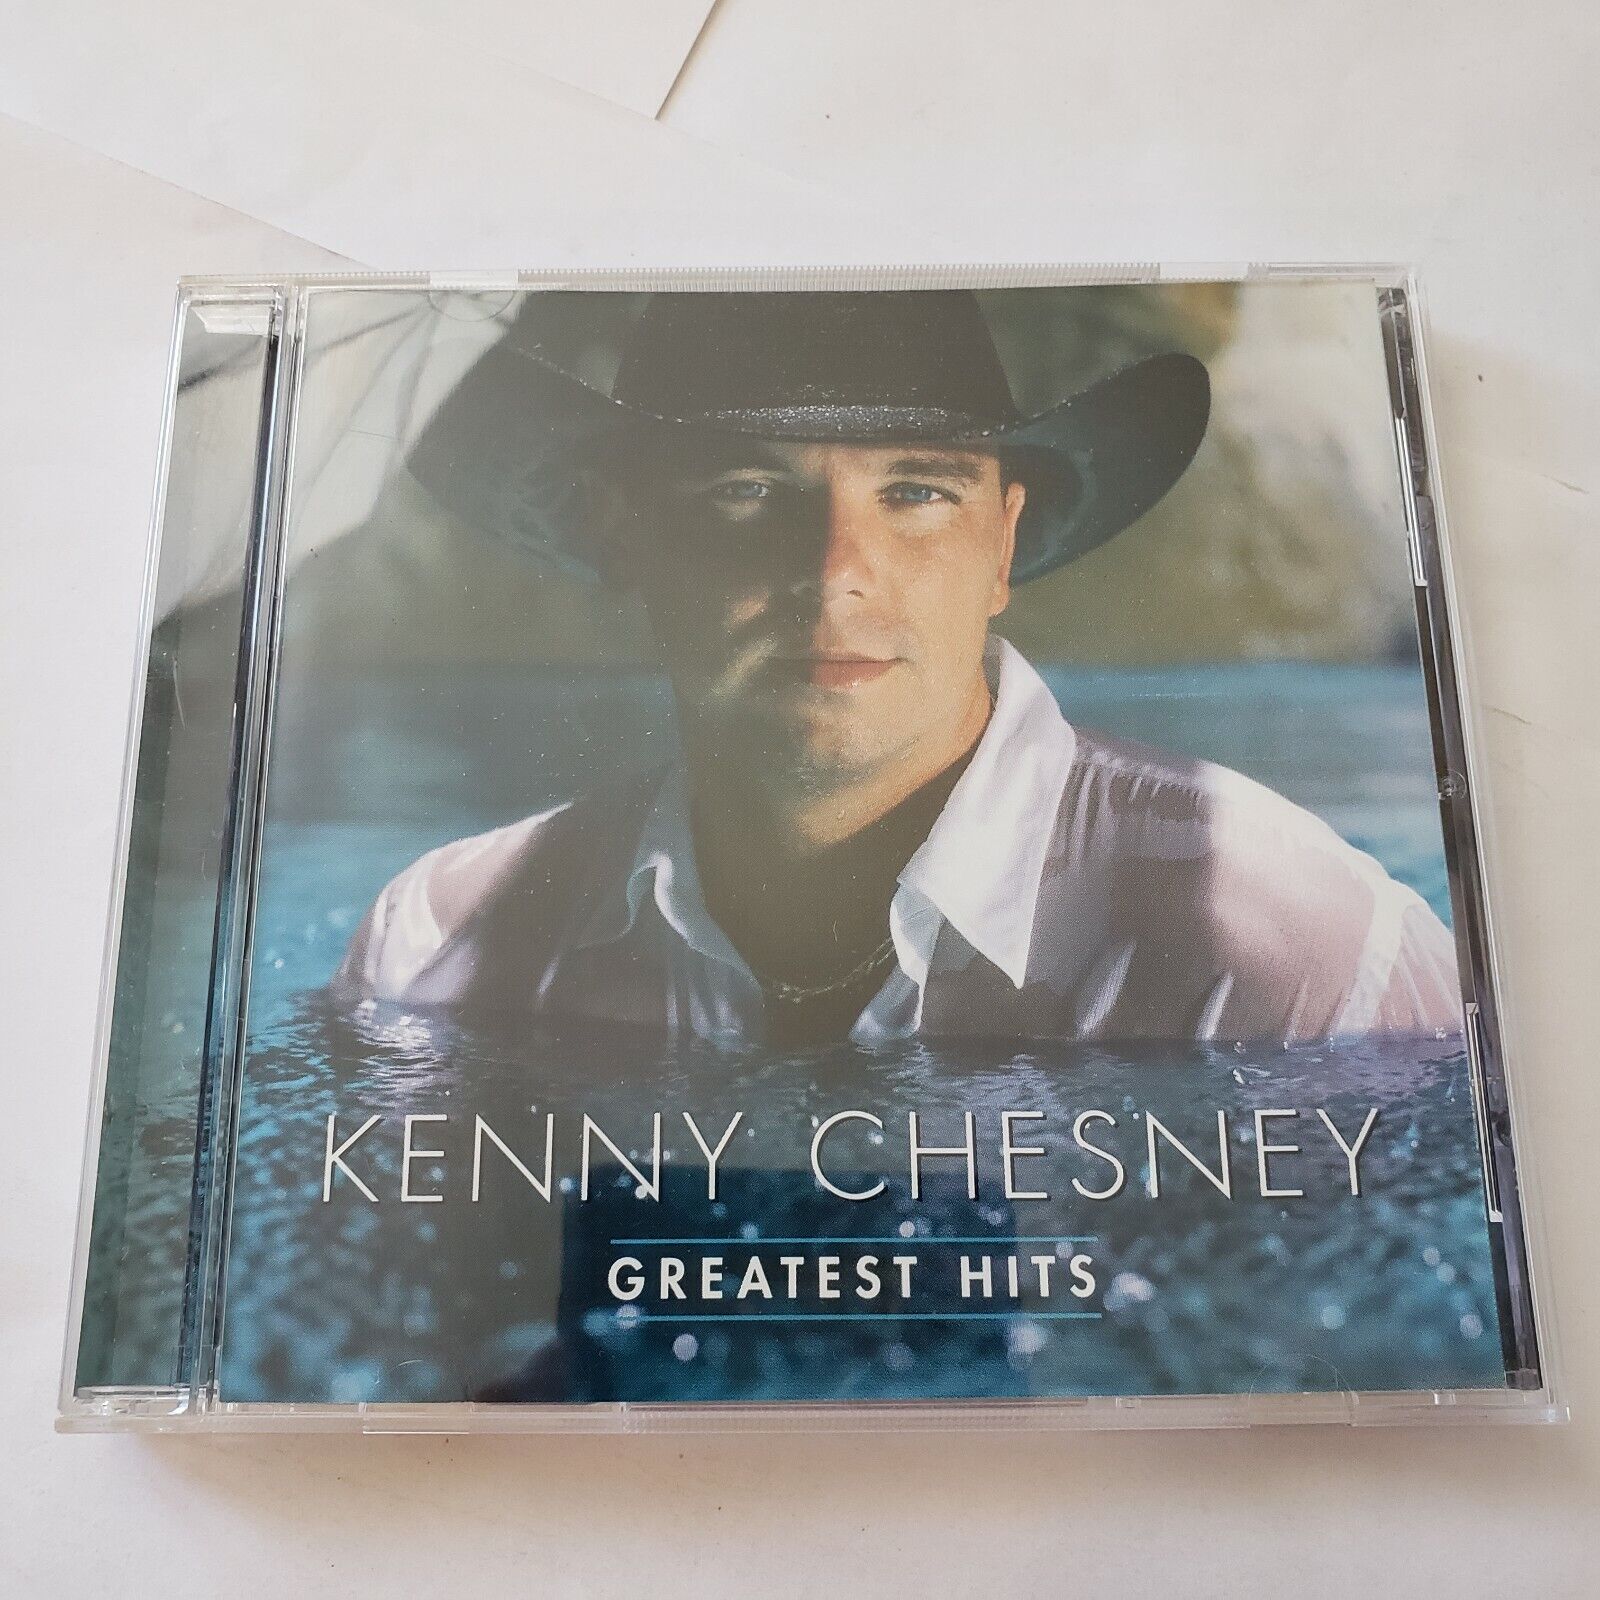 Greatest Hits by Kenny Chesney CD 2000 BMGBack Where I Come From Pre-owned